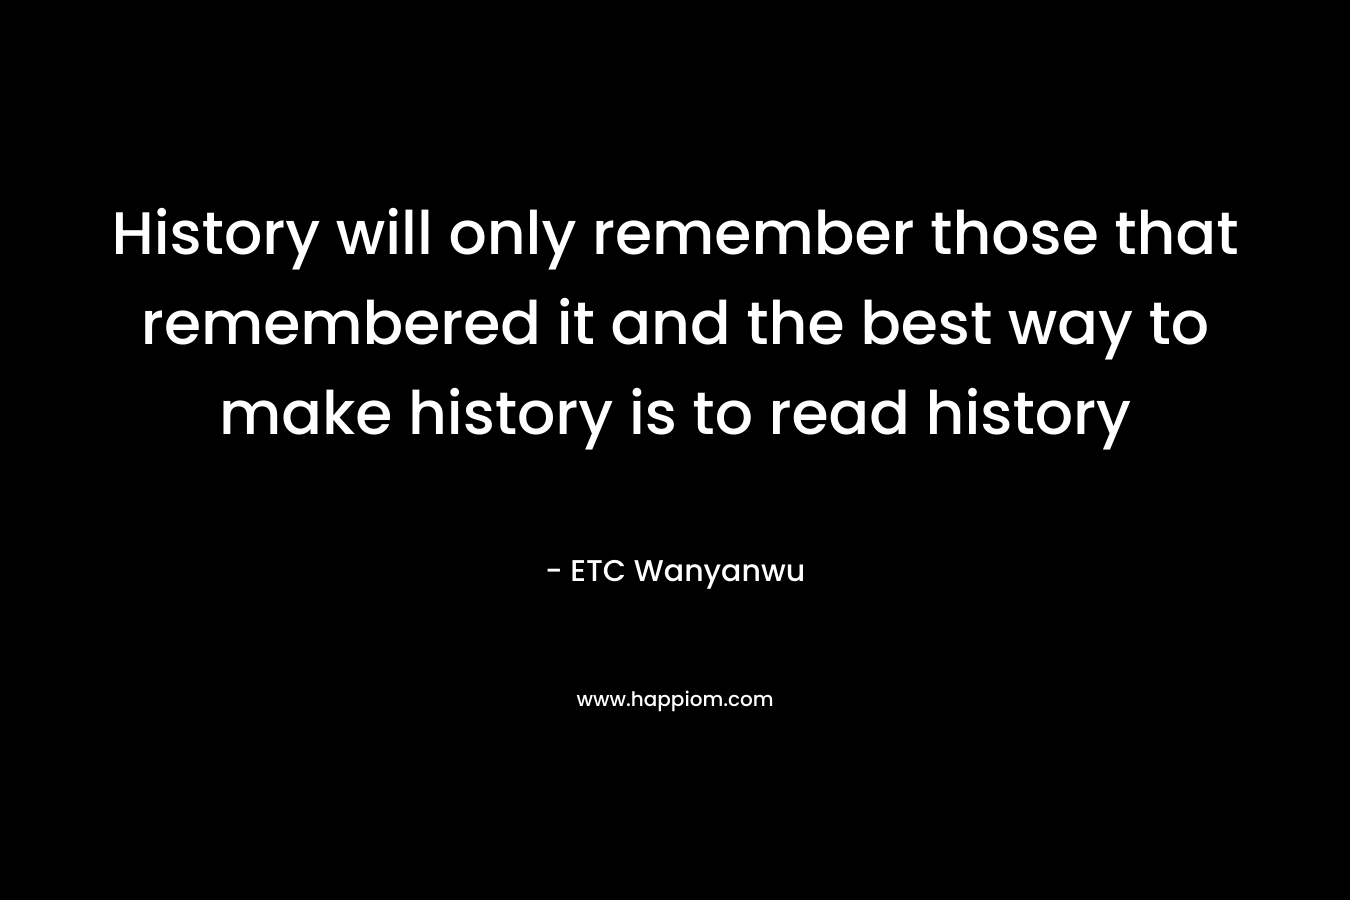 History will only remember those that remembered it and the best way to make history is to read history – ETC Wanyanwu